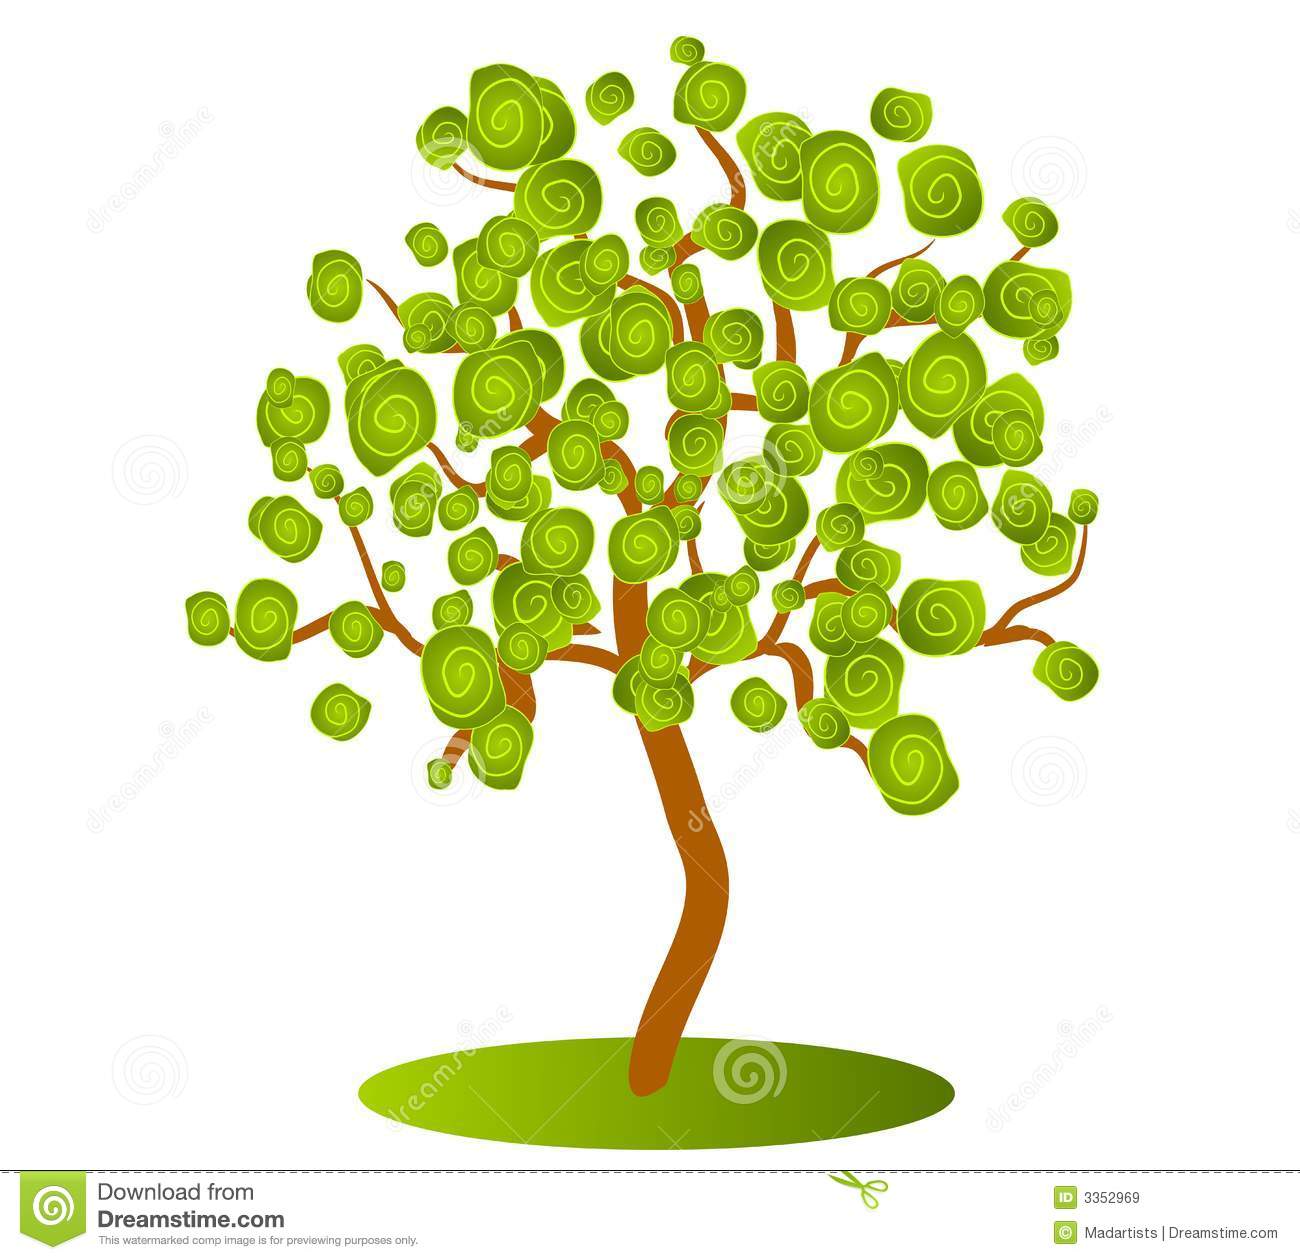 Clip Art Illustration Of An Abstract Looking Tree With Green Swirl